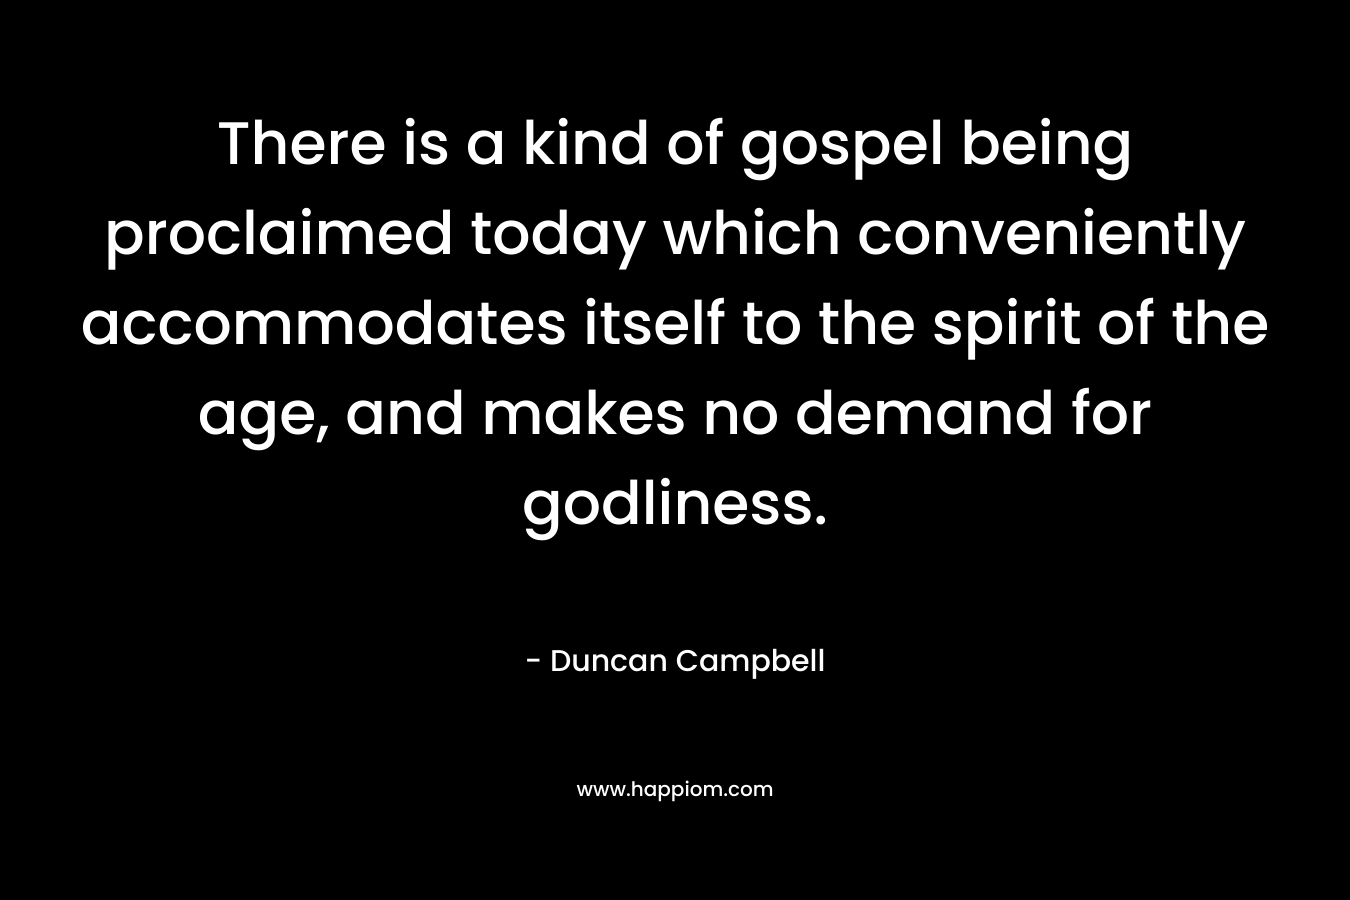 There is a kind of gospel being proclaimed today which conveniently accommodates itself to the spirit of the age, and makes no demand for godliness. – Duncan Campbell